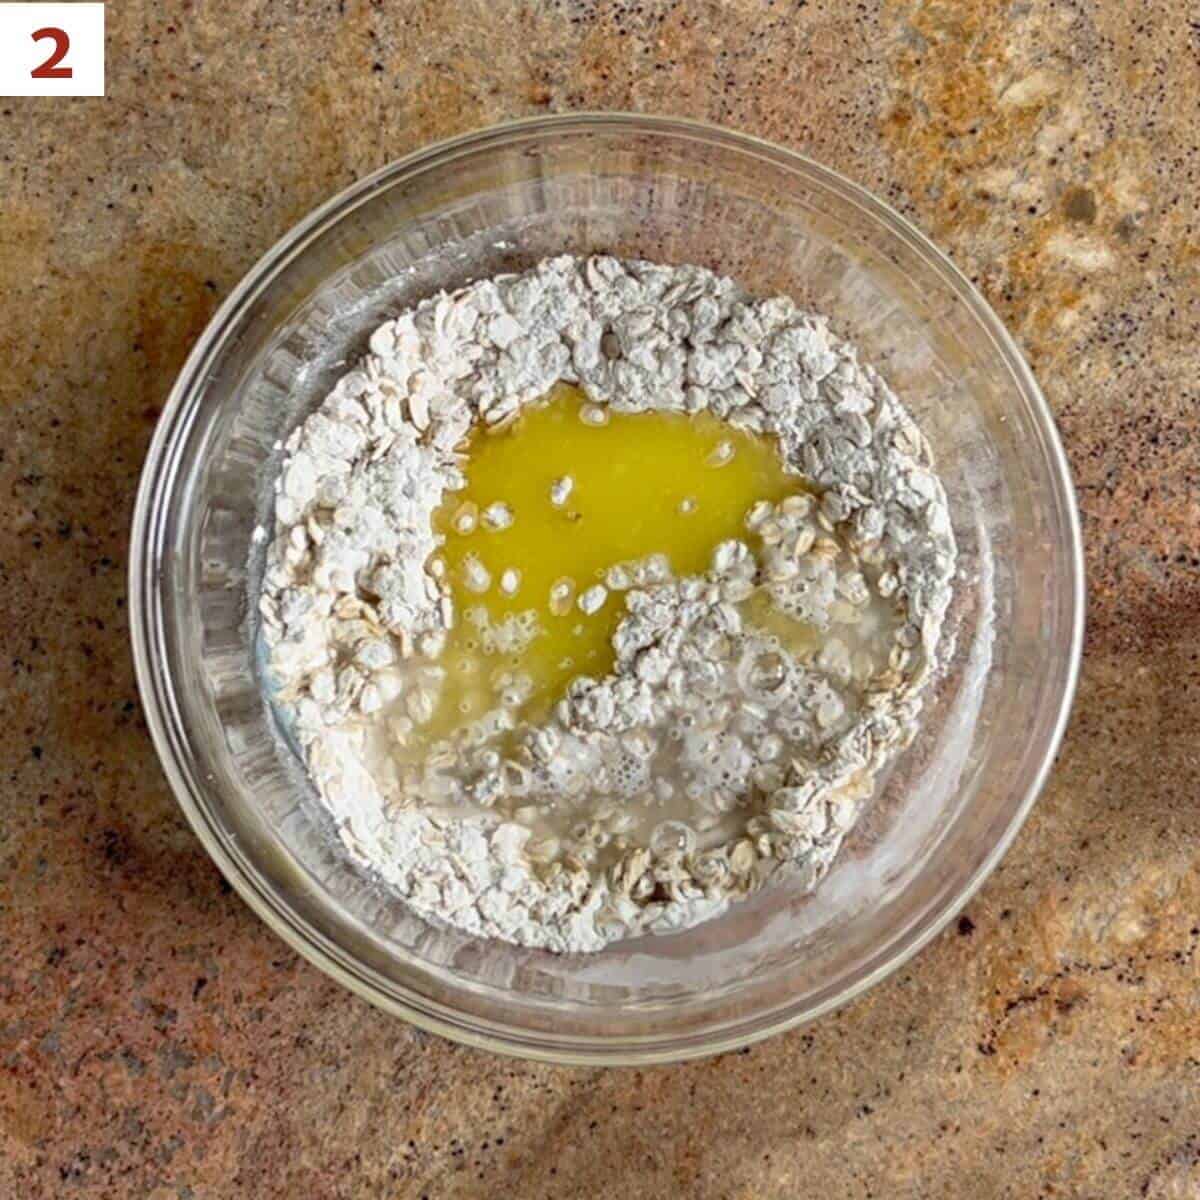 Adding melted butter and water to dry ingredients in a glass bowl.